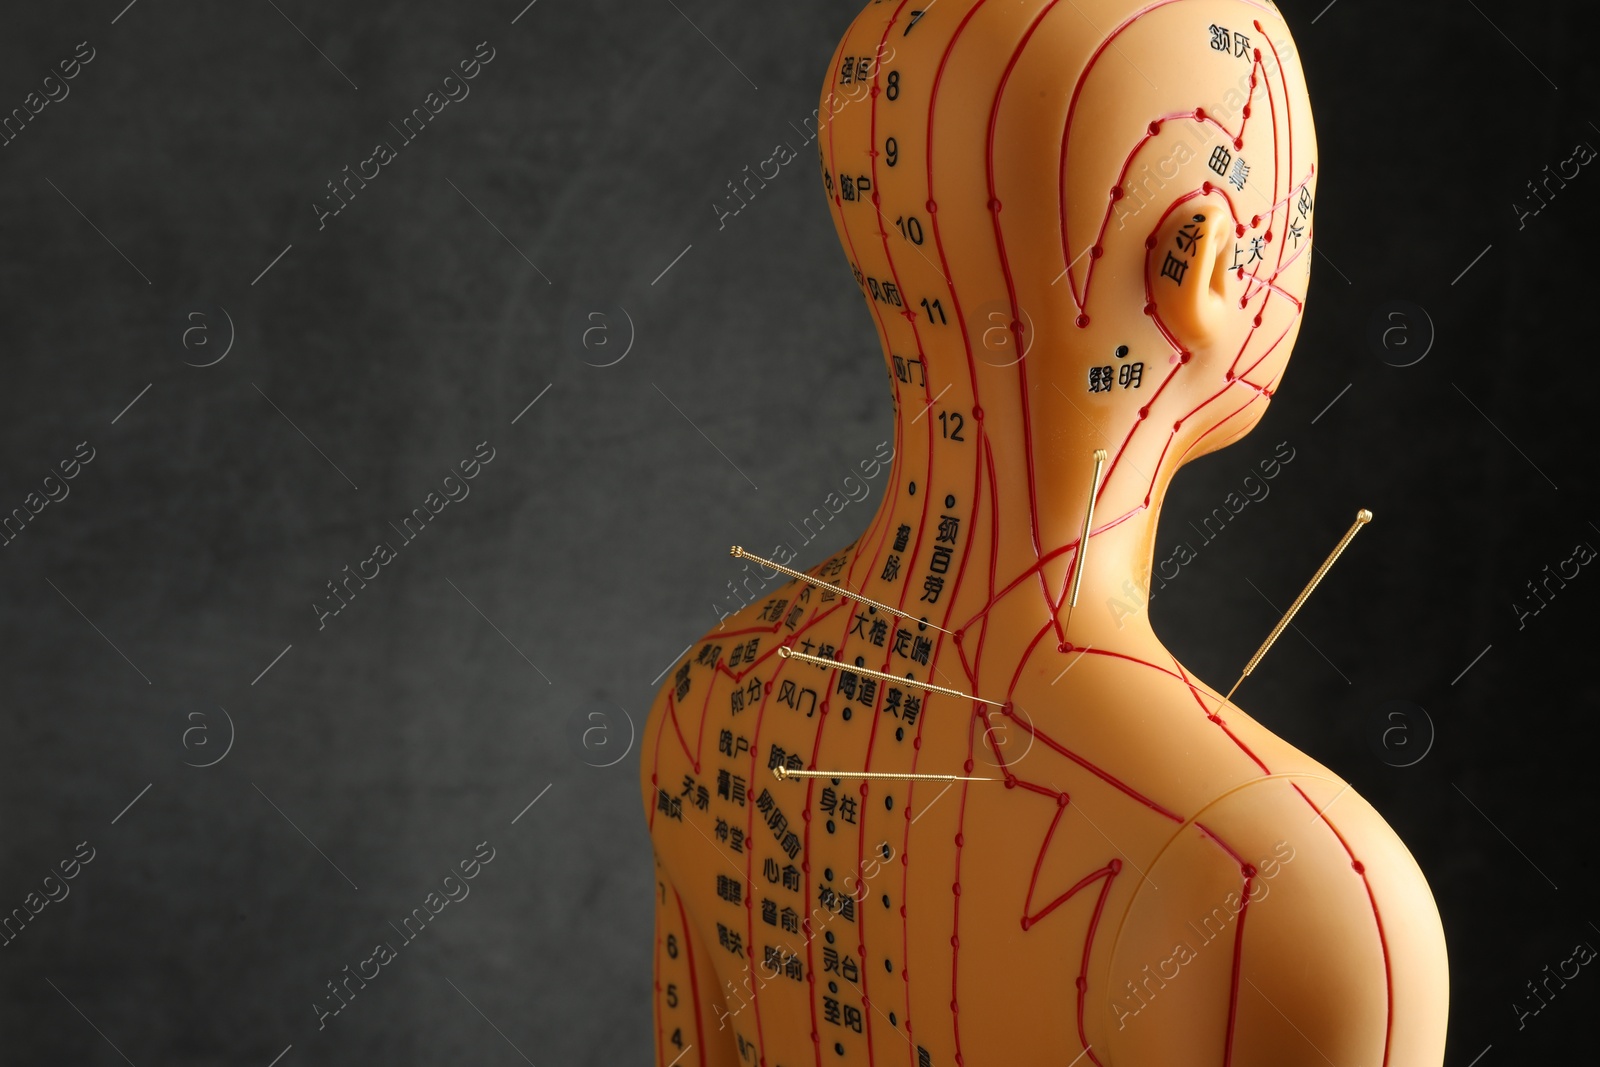 Photo of Acupuncture - alternative medicine. Human model with needles in shoulder against dark grey background, space for text